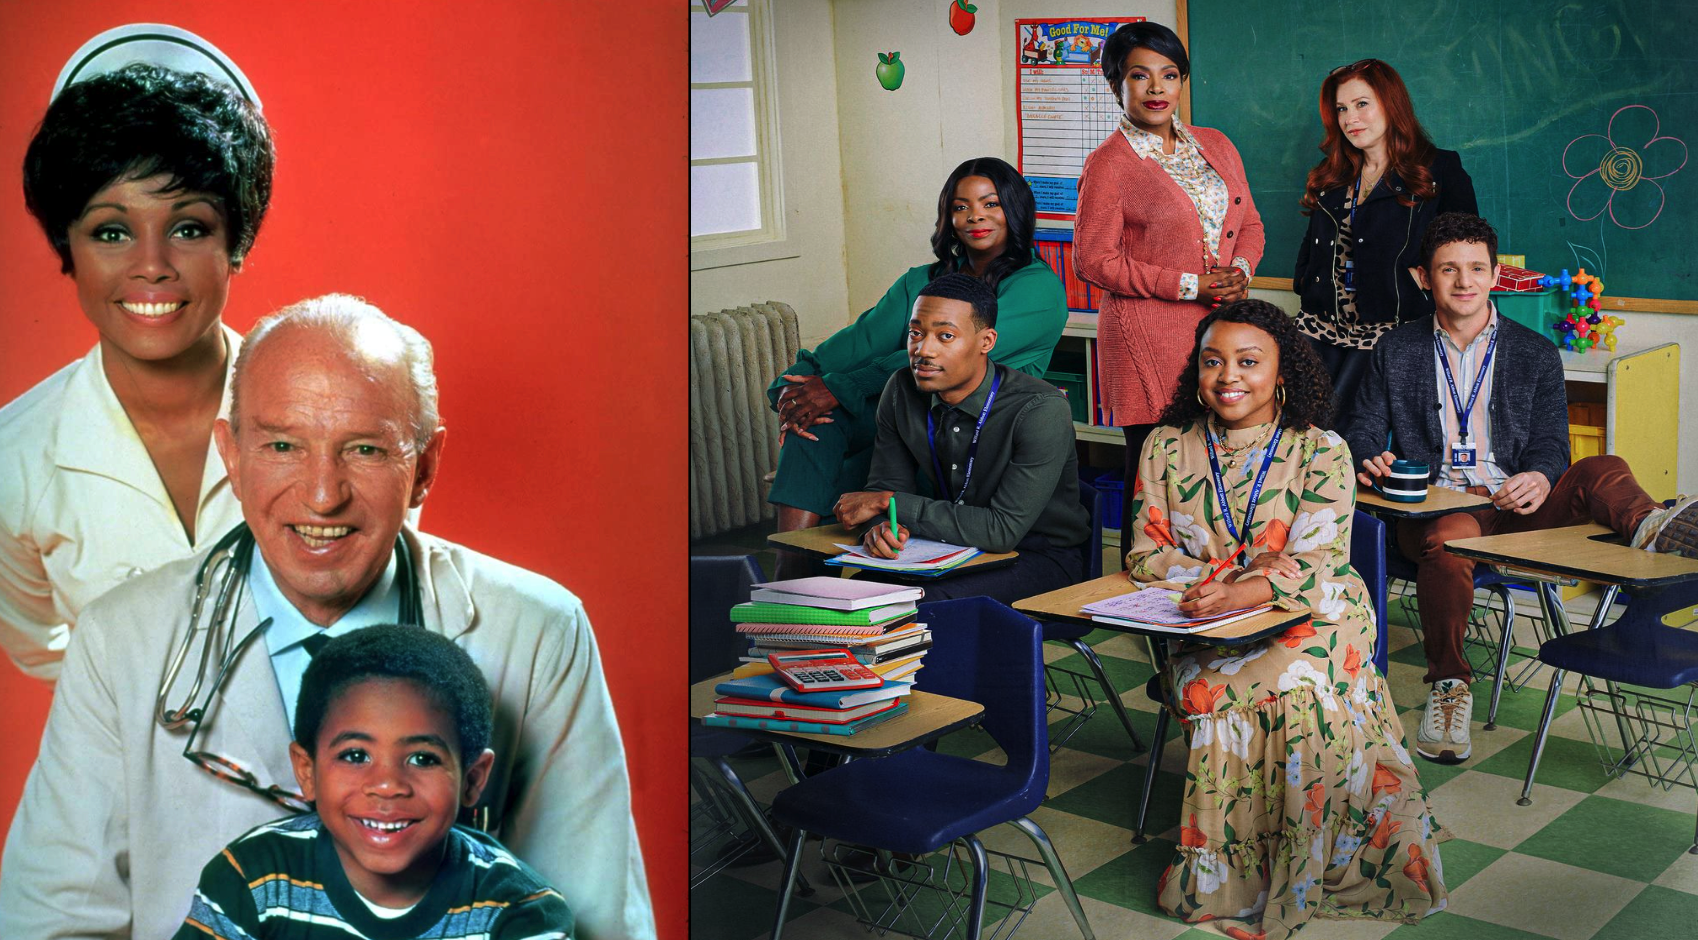 The Triumphs of Black Artists in TV